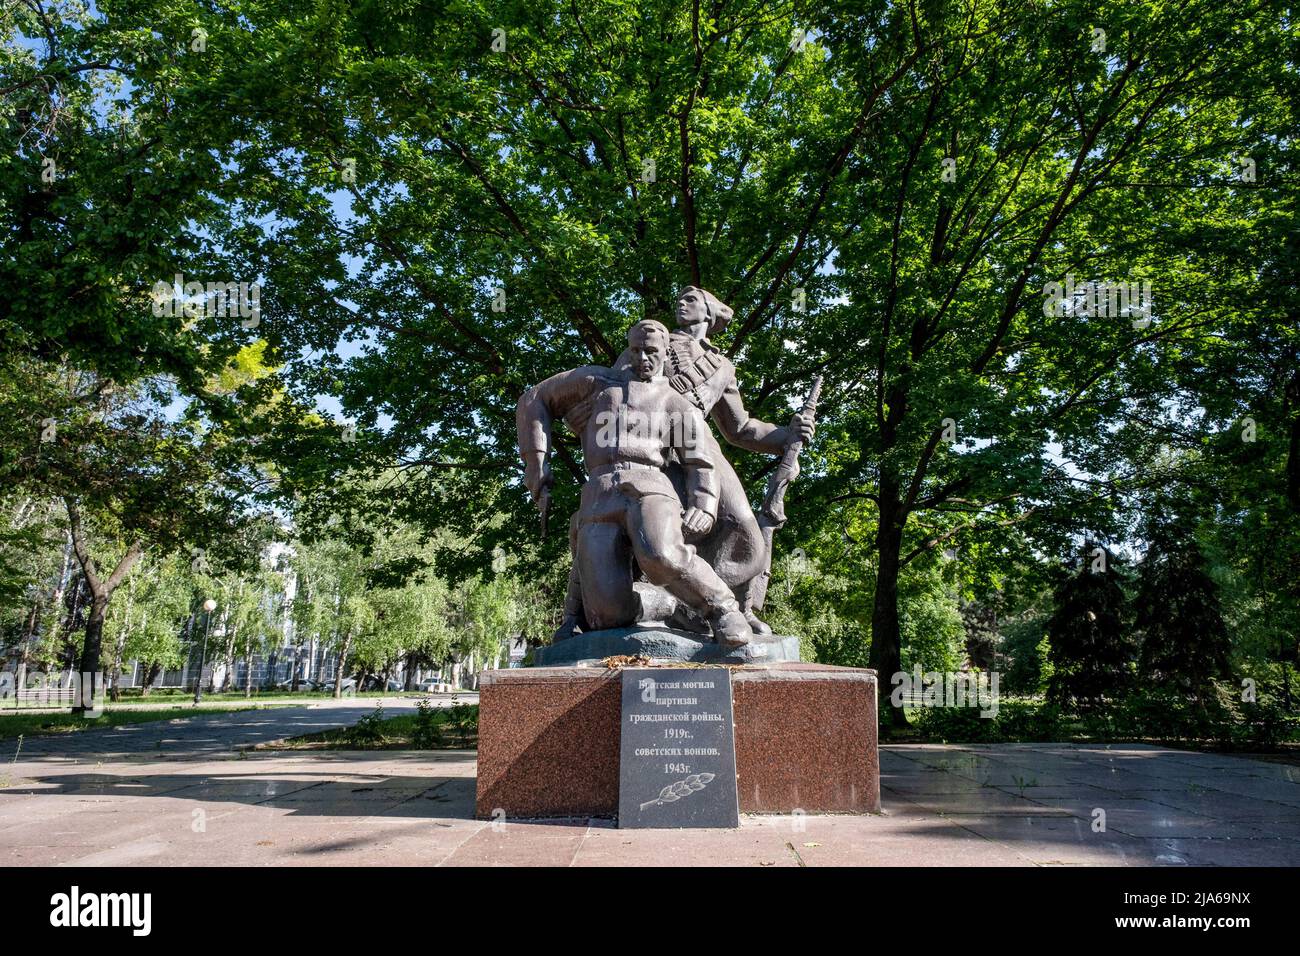 Bakhmut, Ukraine. 24th May, 2022. A soviet statue can be seen in a park in Bakhmut, Donbas. As Bakhmut stands as a key city to Ukrainian forces in defending Donetsk(Donbas) region, the city is under attack by the Russian troops. The Russian invasion of Ukraine started on February 24, the war that has killed numerous civilians and soldiers. Credit: SOPA Images Limited/Alamy Live News Stock Photo